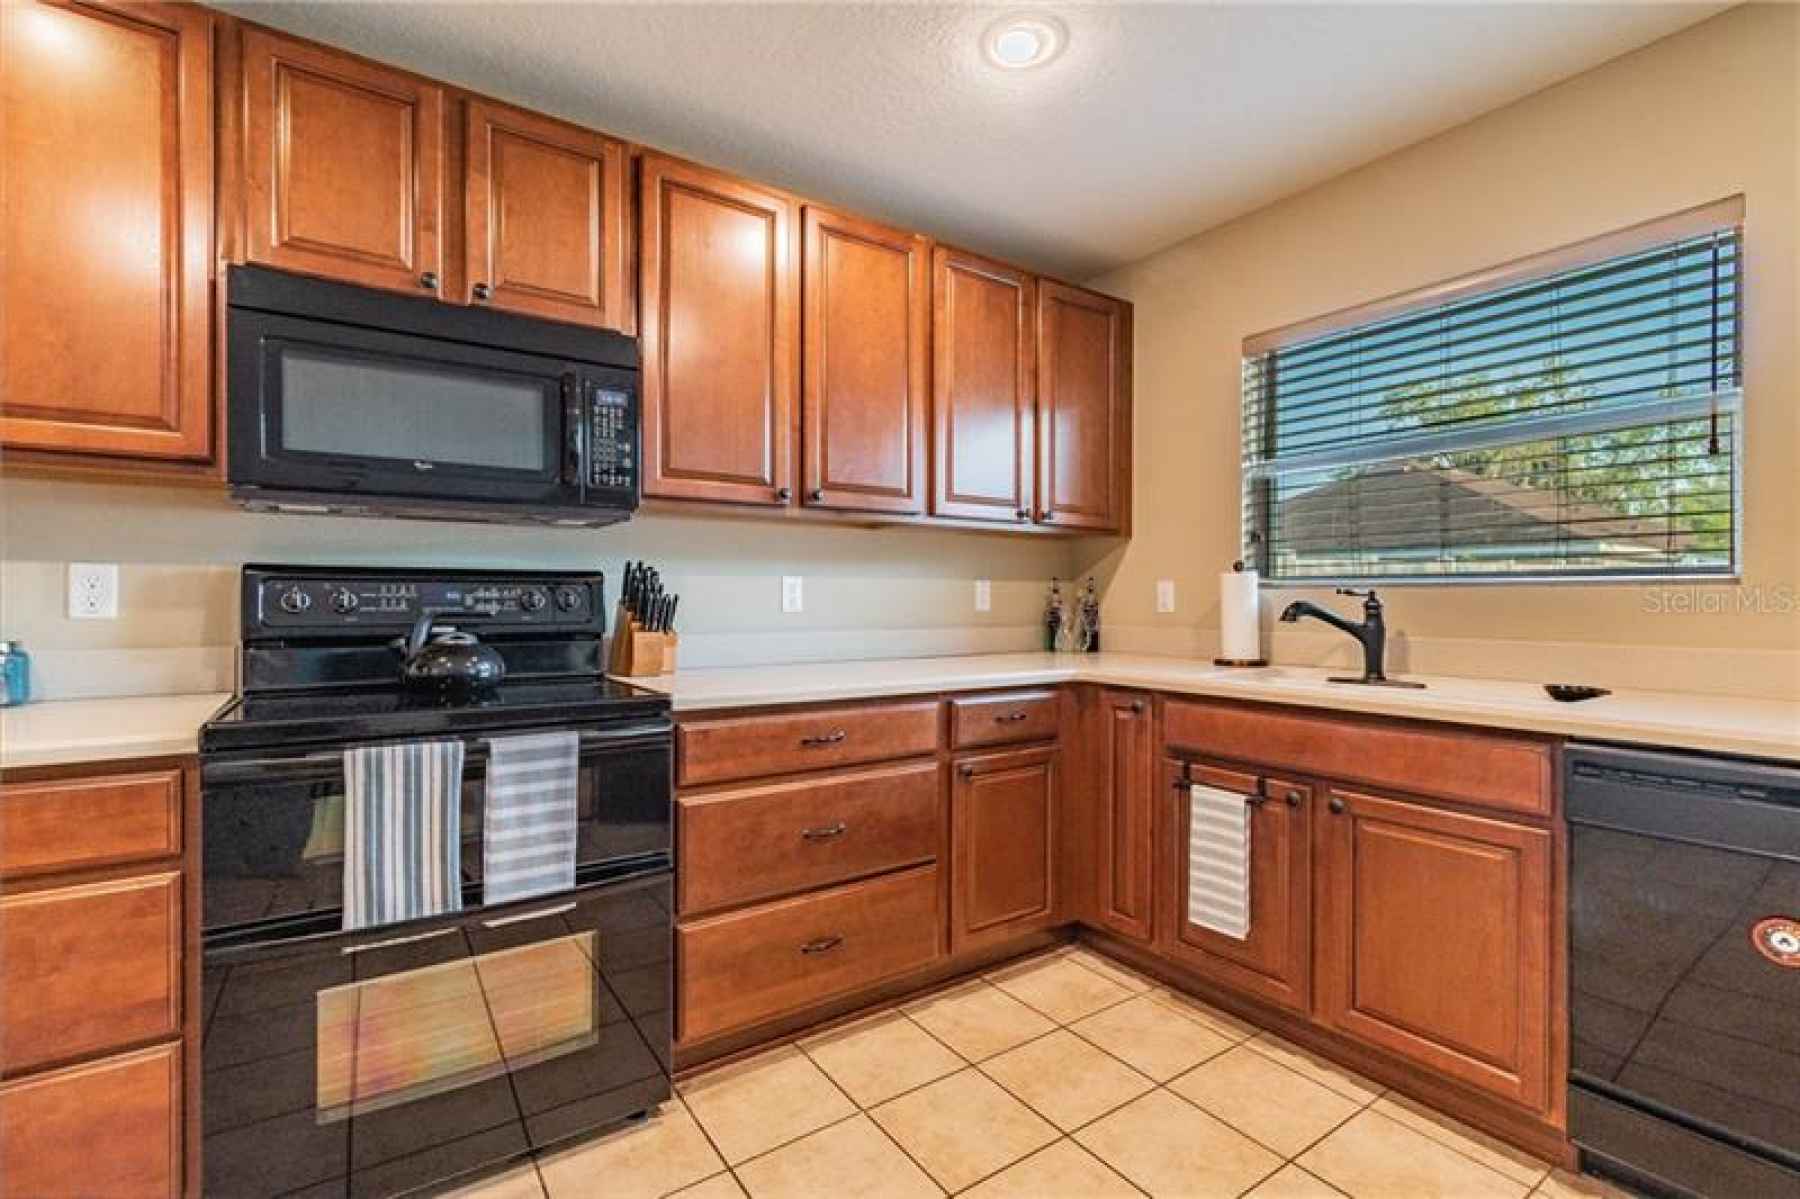 Double oven range and Microwave